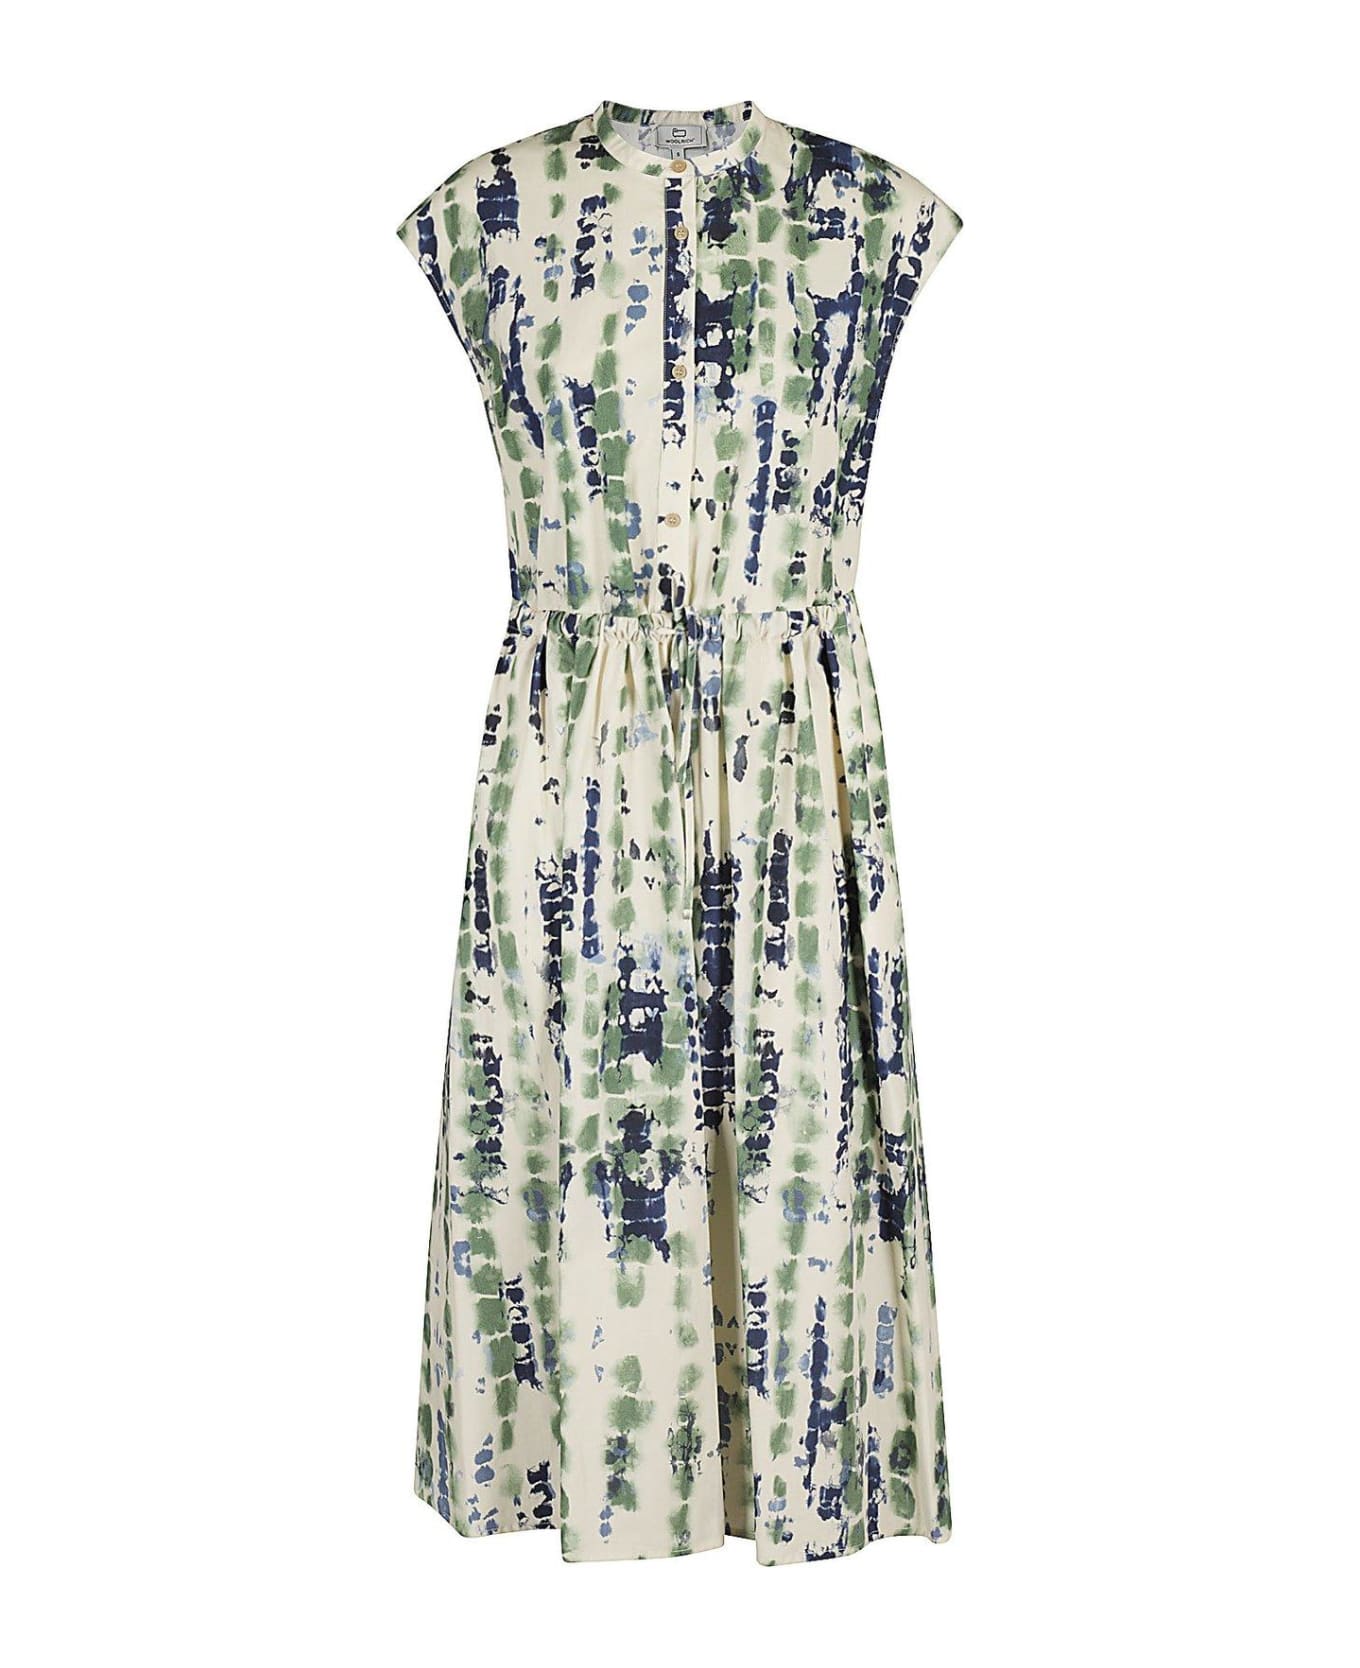 Woolrich All-over Motif Printed Midi Dress - Sage